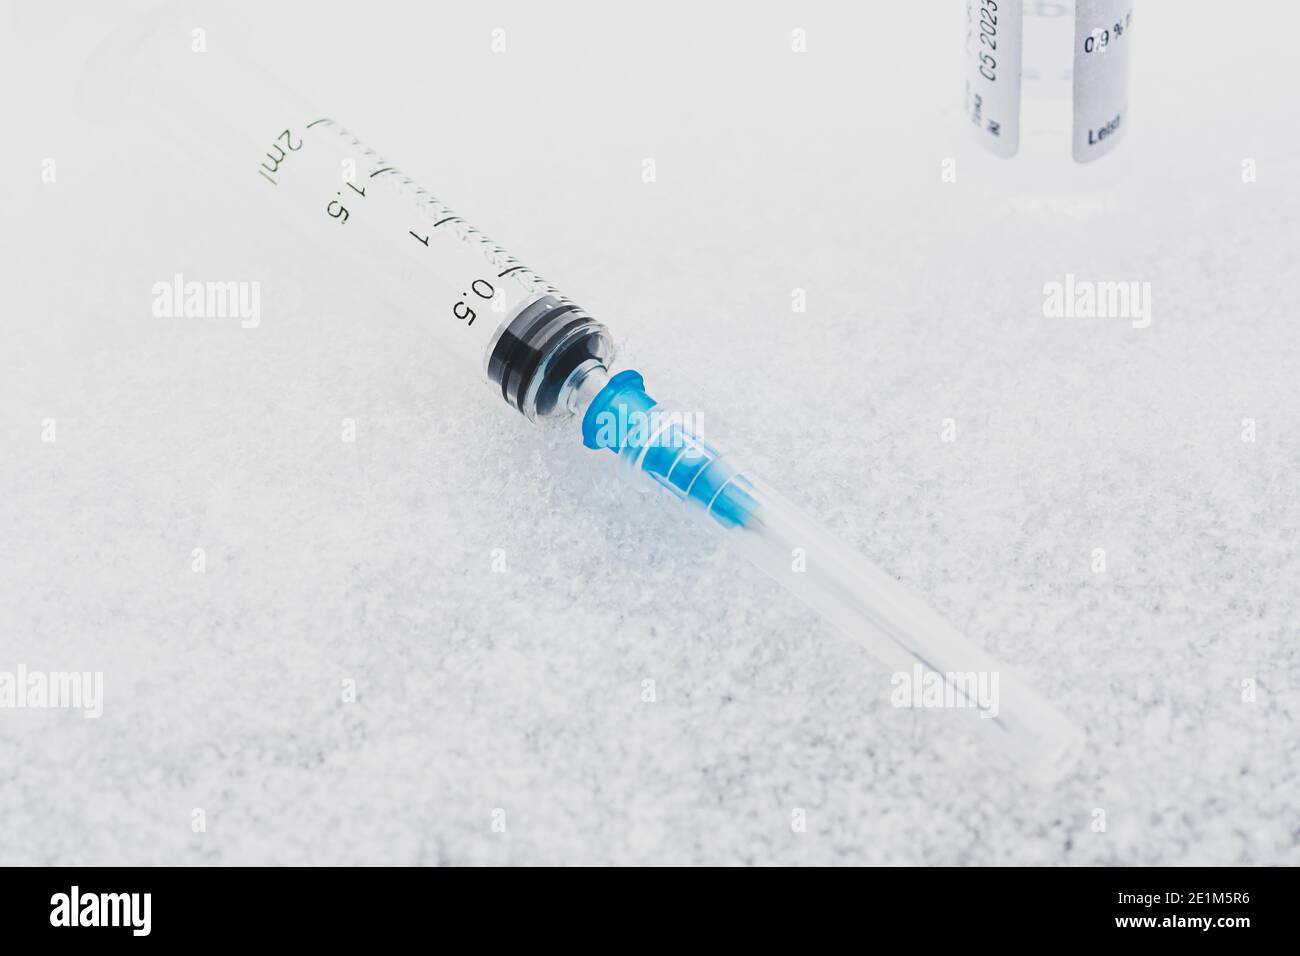 Syringe and vial ready to be used on the ice or snow. Covid or Coronavirus vaccine background Stock Photo